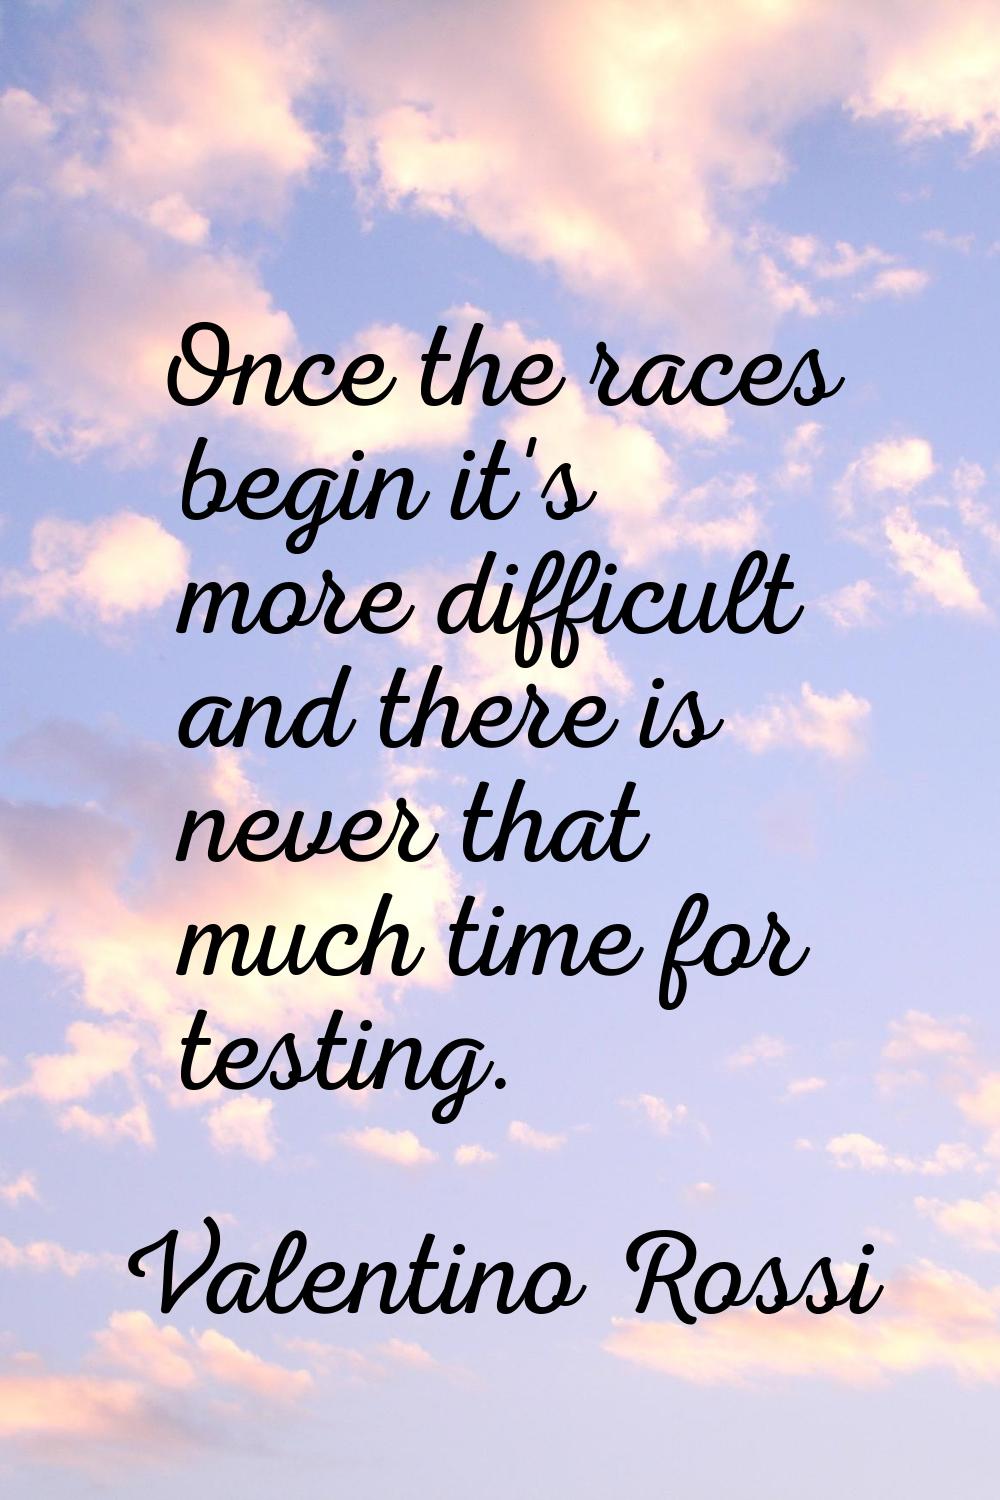 Once the races begin it's more difficult and there is never that much time for testing.